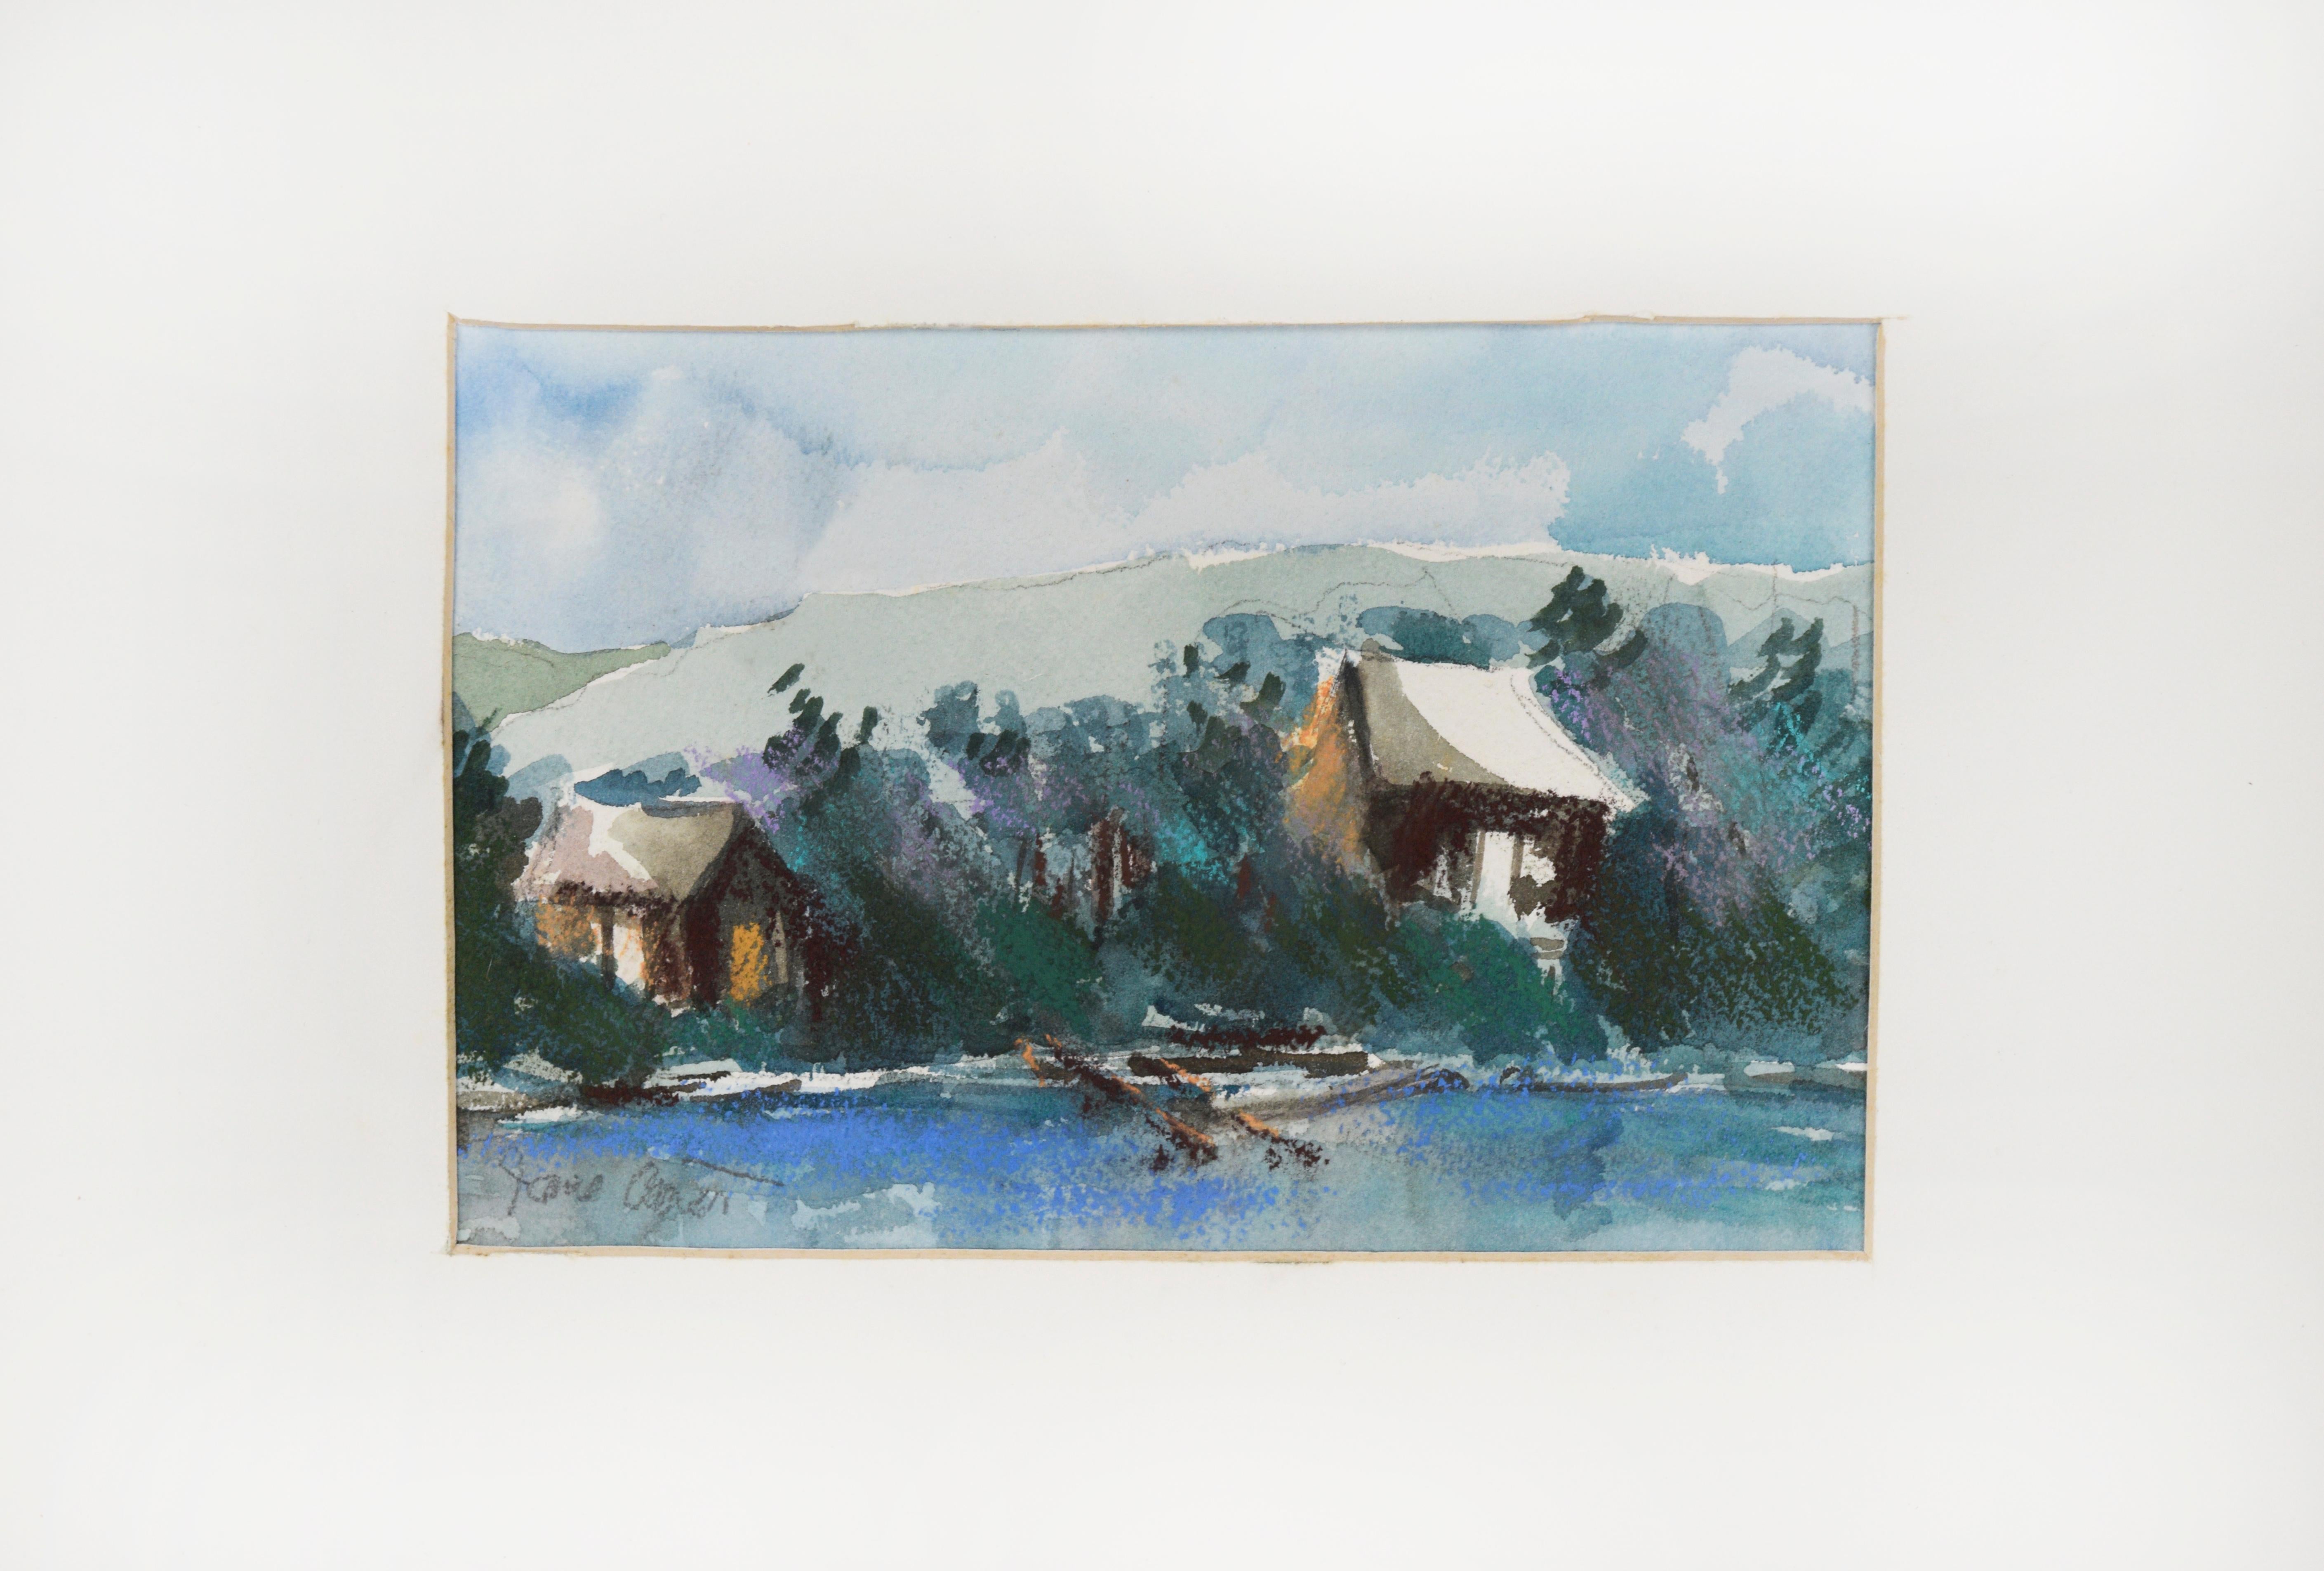 Lakeside Cabin - Pastel and Watercolor on Paper - Painting by Unknown